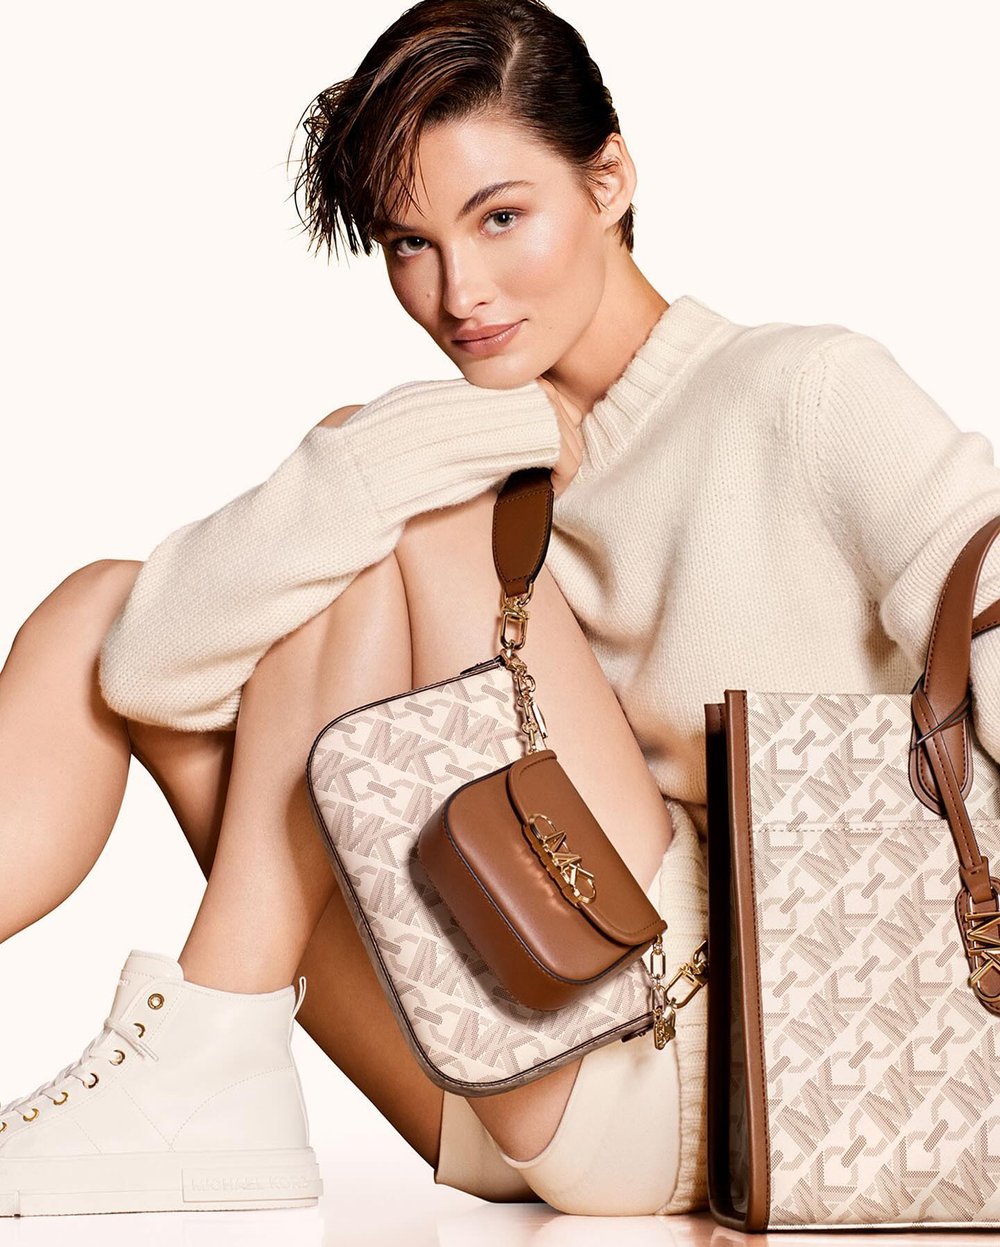 Eve Jobs by Ethan James Green for Louis Vuitton Twist Handbags and  Equestrian Life — Anne of Carversville